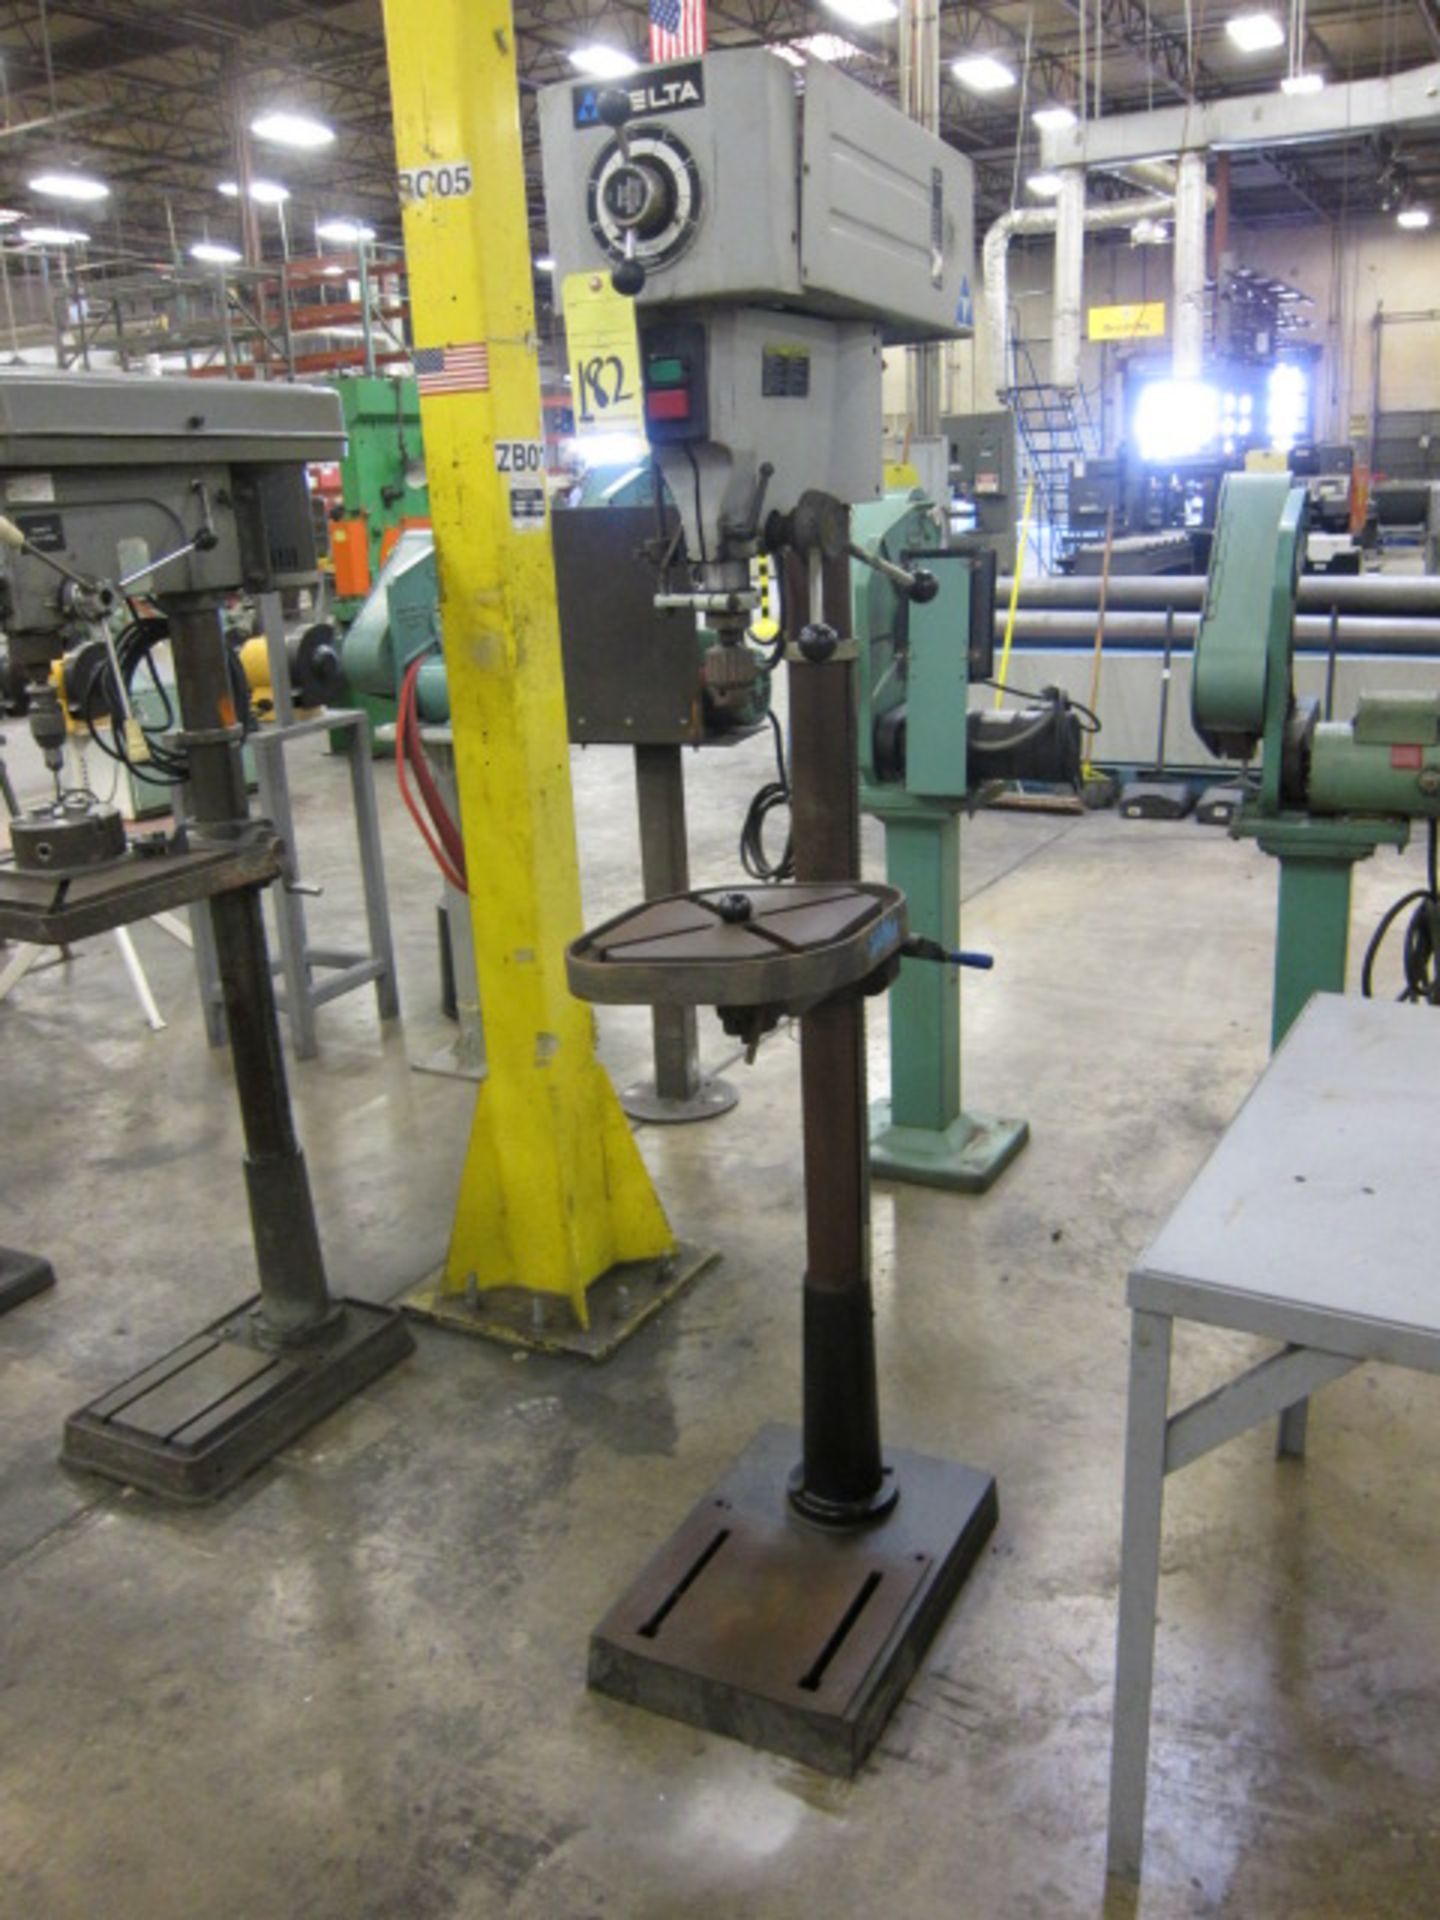 GANG STYLE DRILL PRESS, DELTA 15", 2-spdl., multi-spdl. drilling heads, oil grove production table